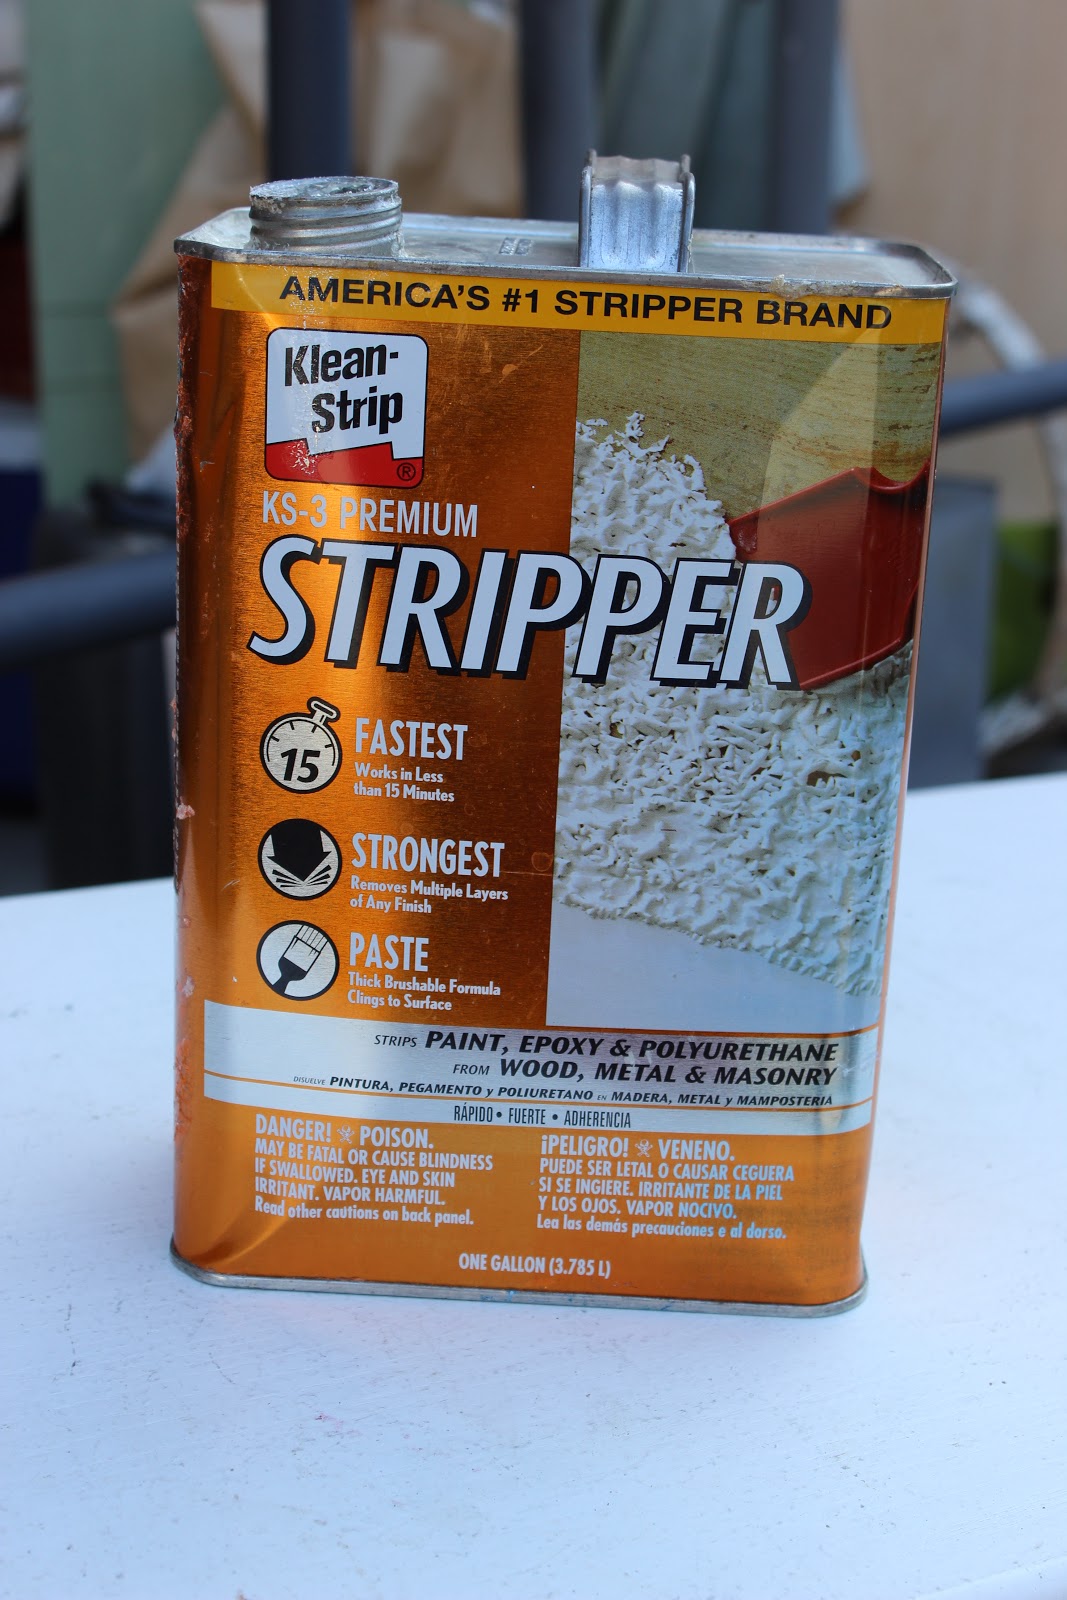 How do you strip paint?